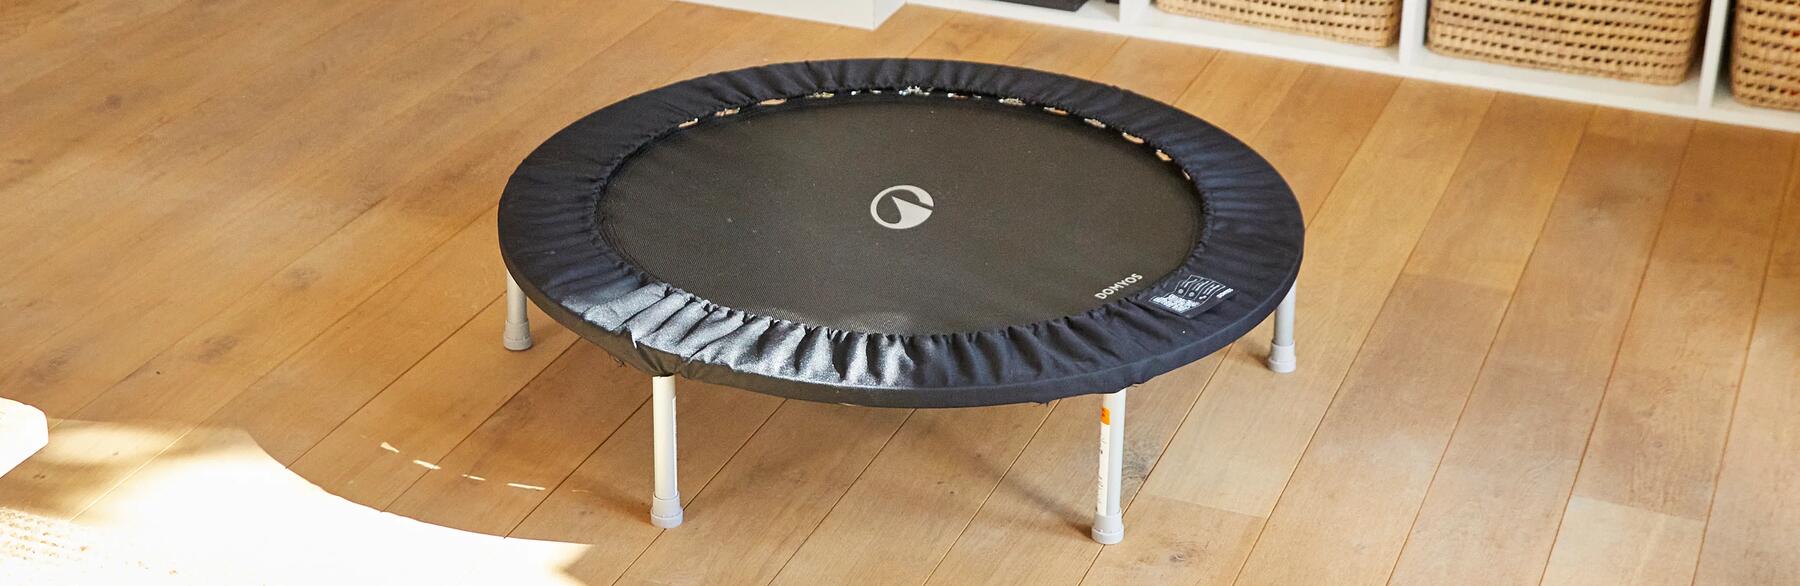 100 Fitness Trampoline: User guide and repairs